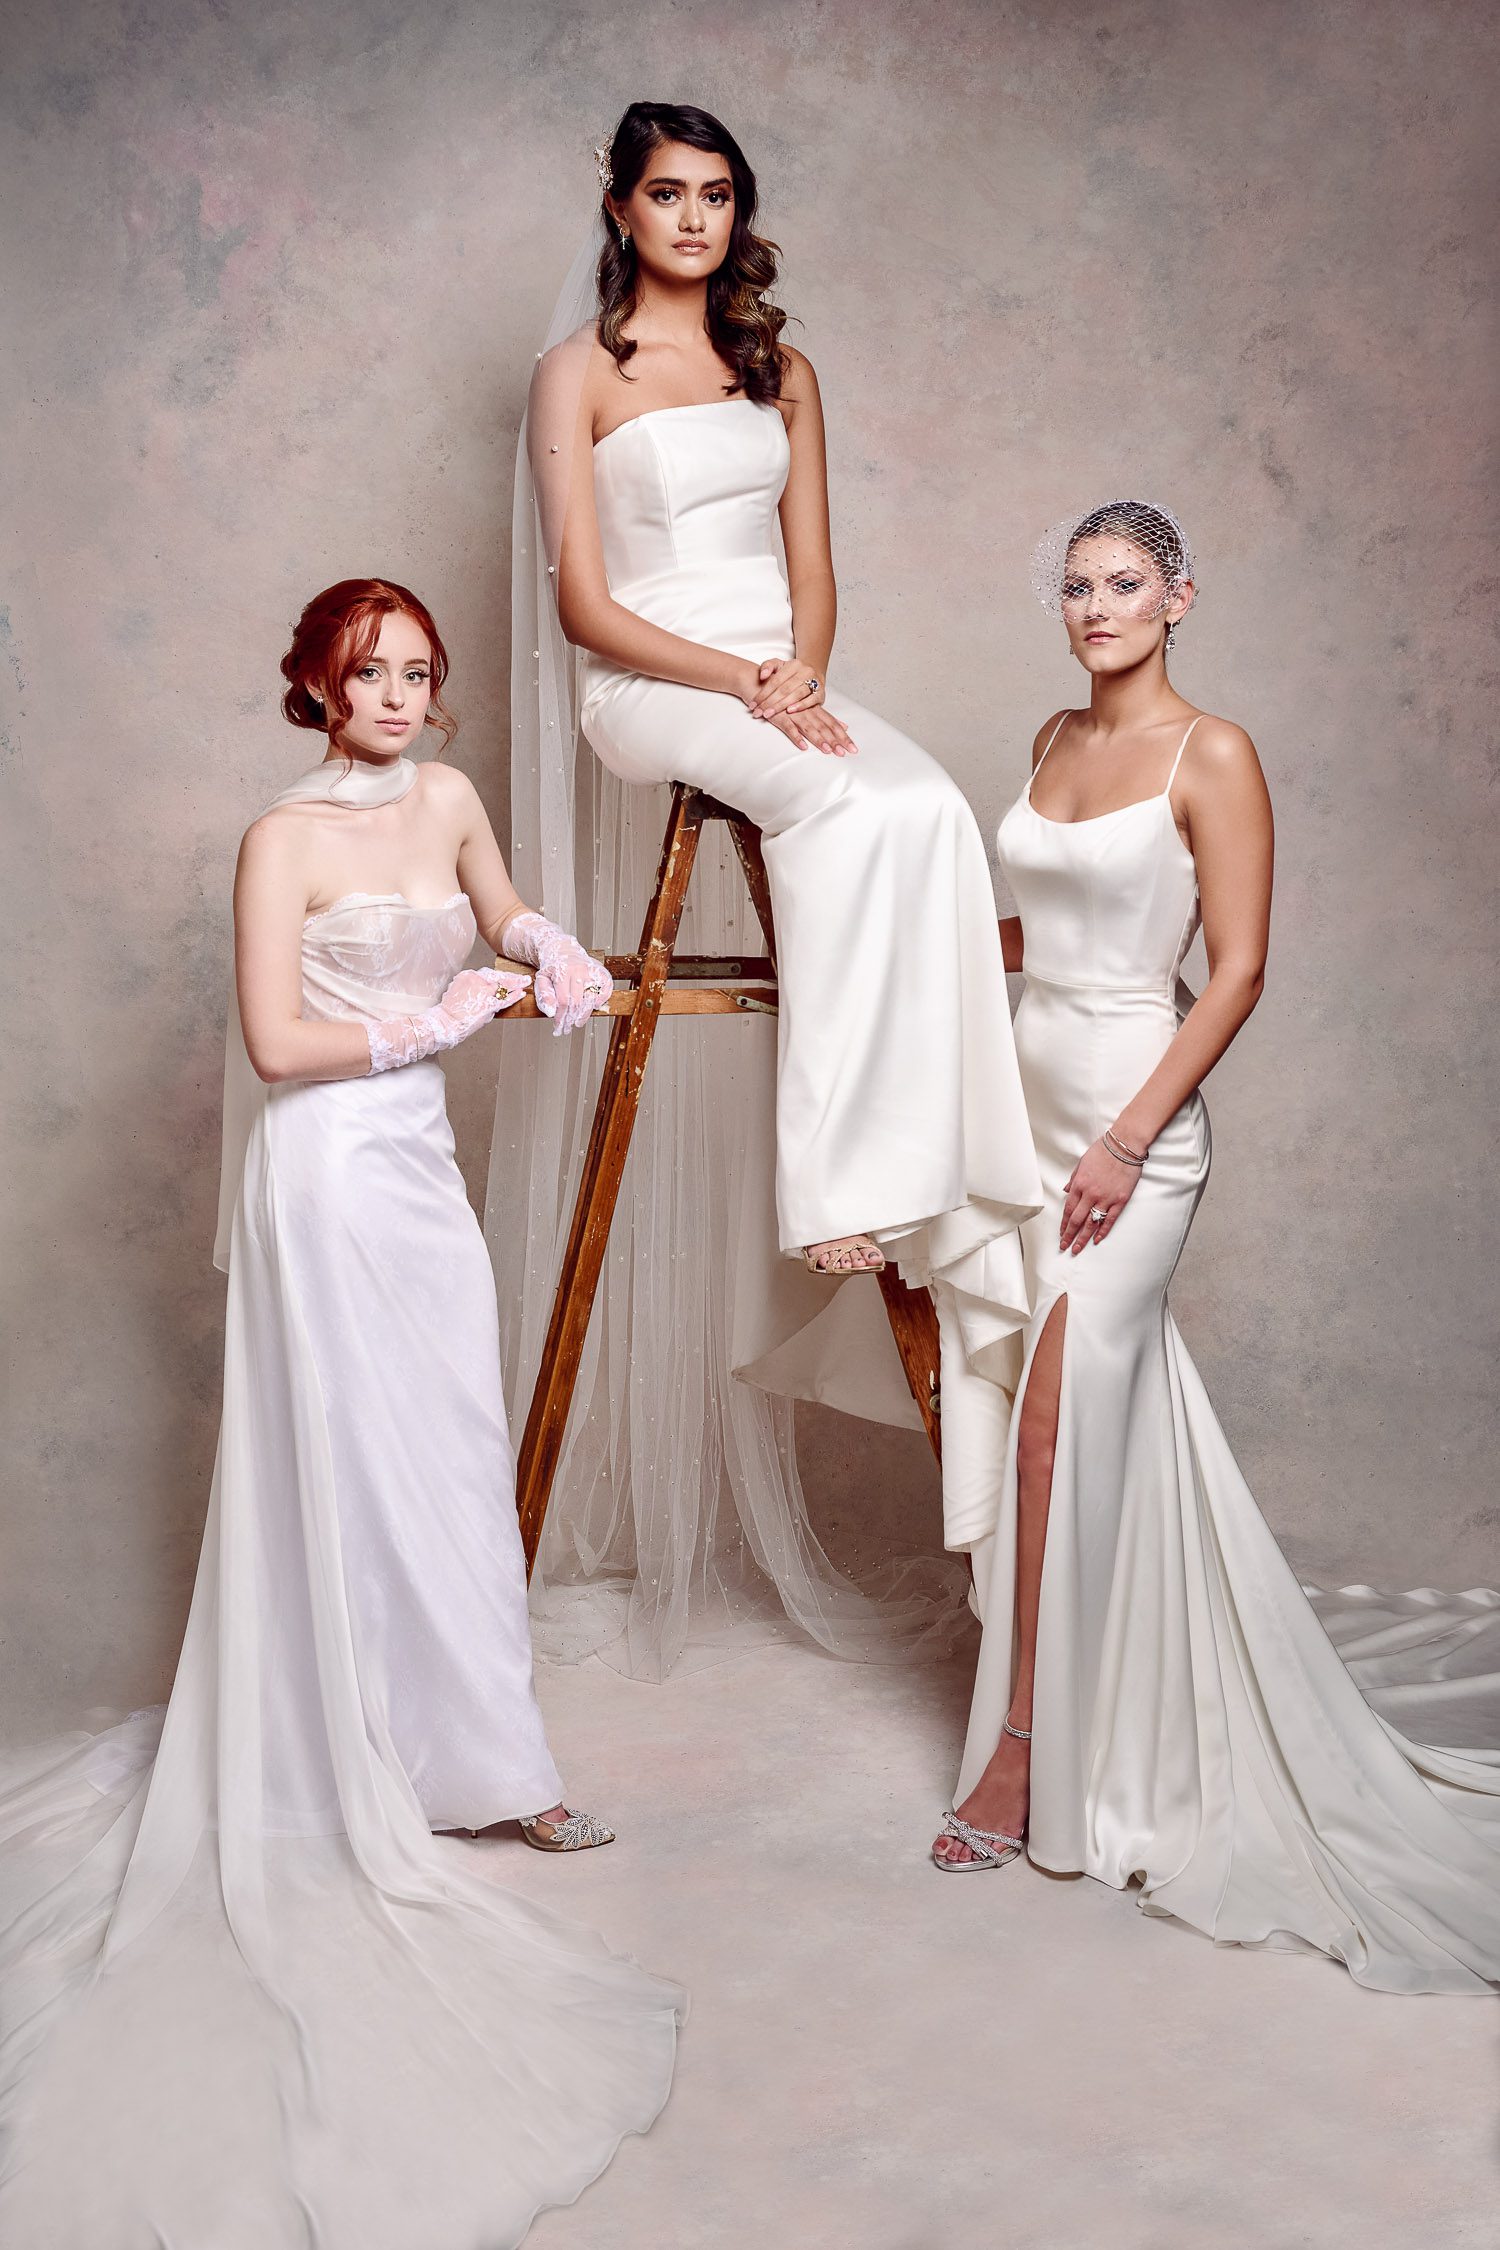 Three brides pose with wooden ladder on Oliphant Background.